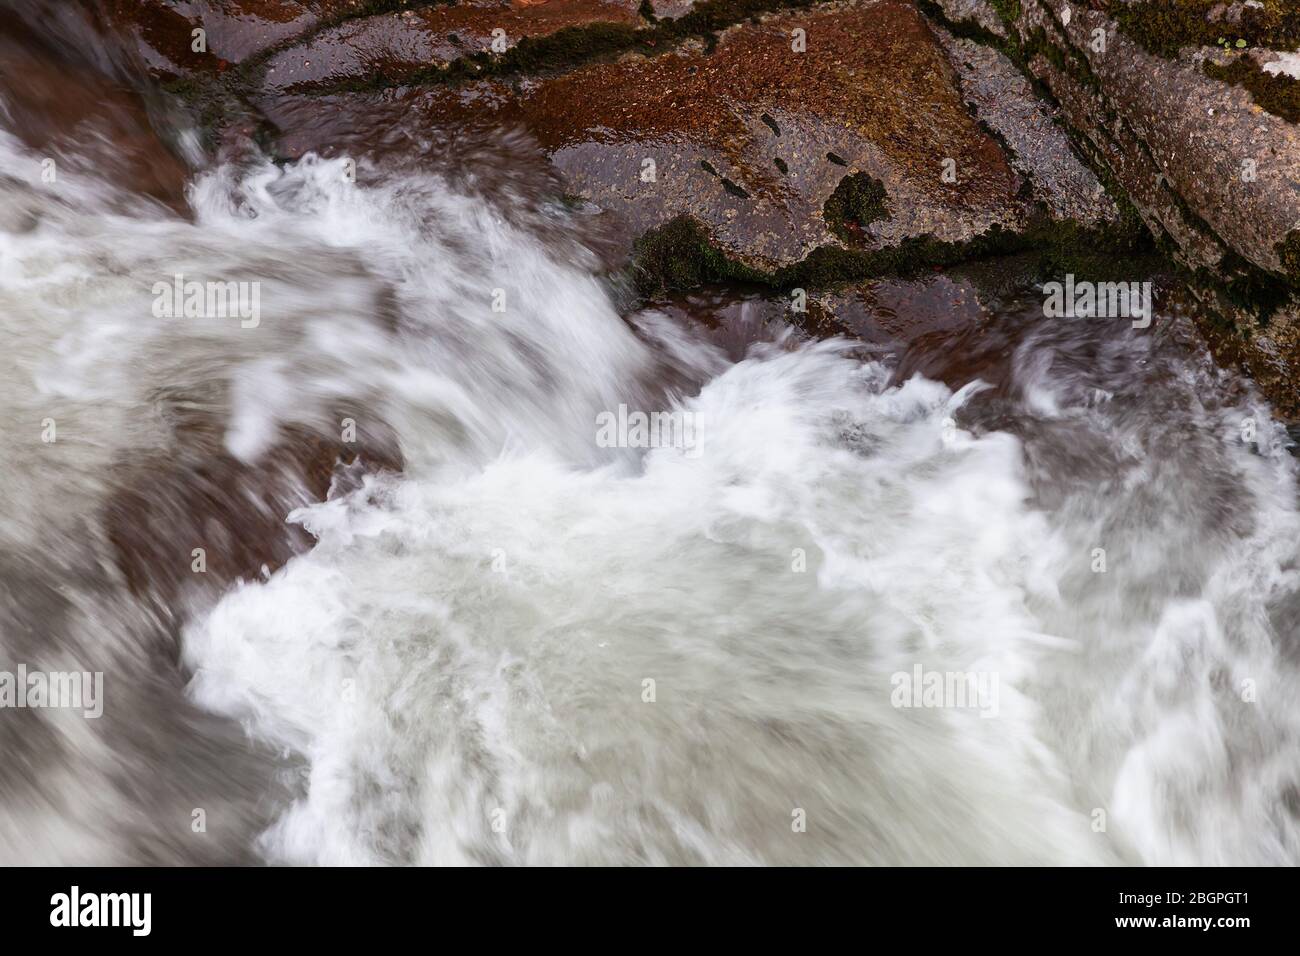 Beautiful close up details and shapes of powerful mountain creek rapids cascading over red, wet rocks of a canyon Stock Photo